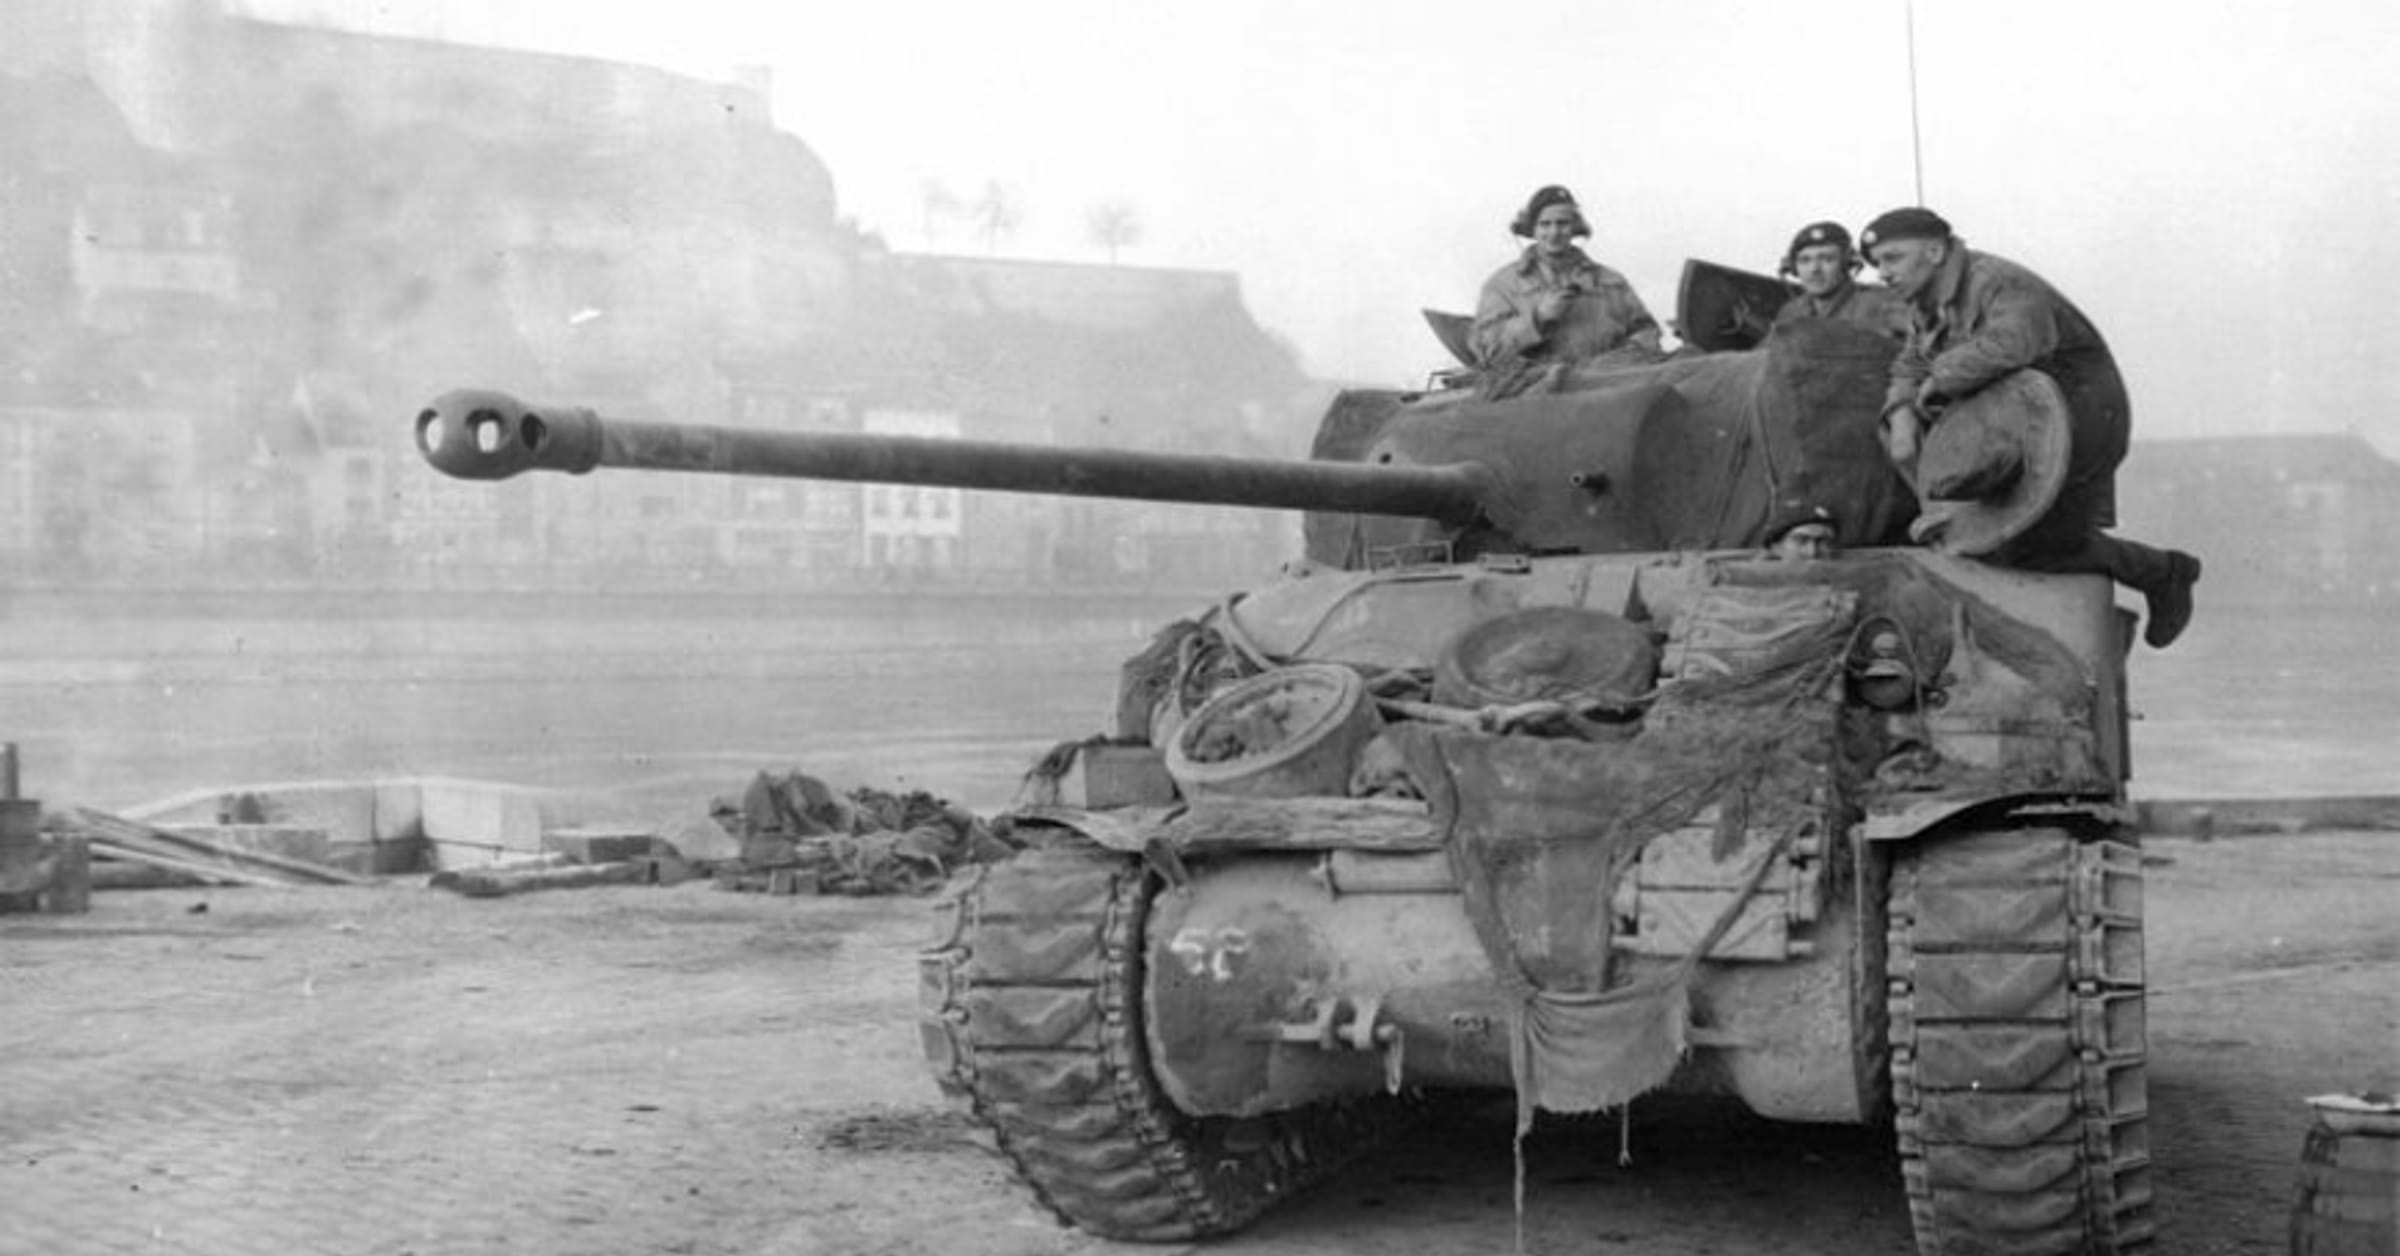 5 types of extra armor that were added to tanks during WWII